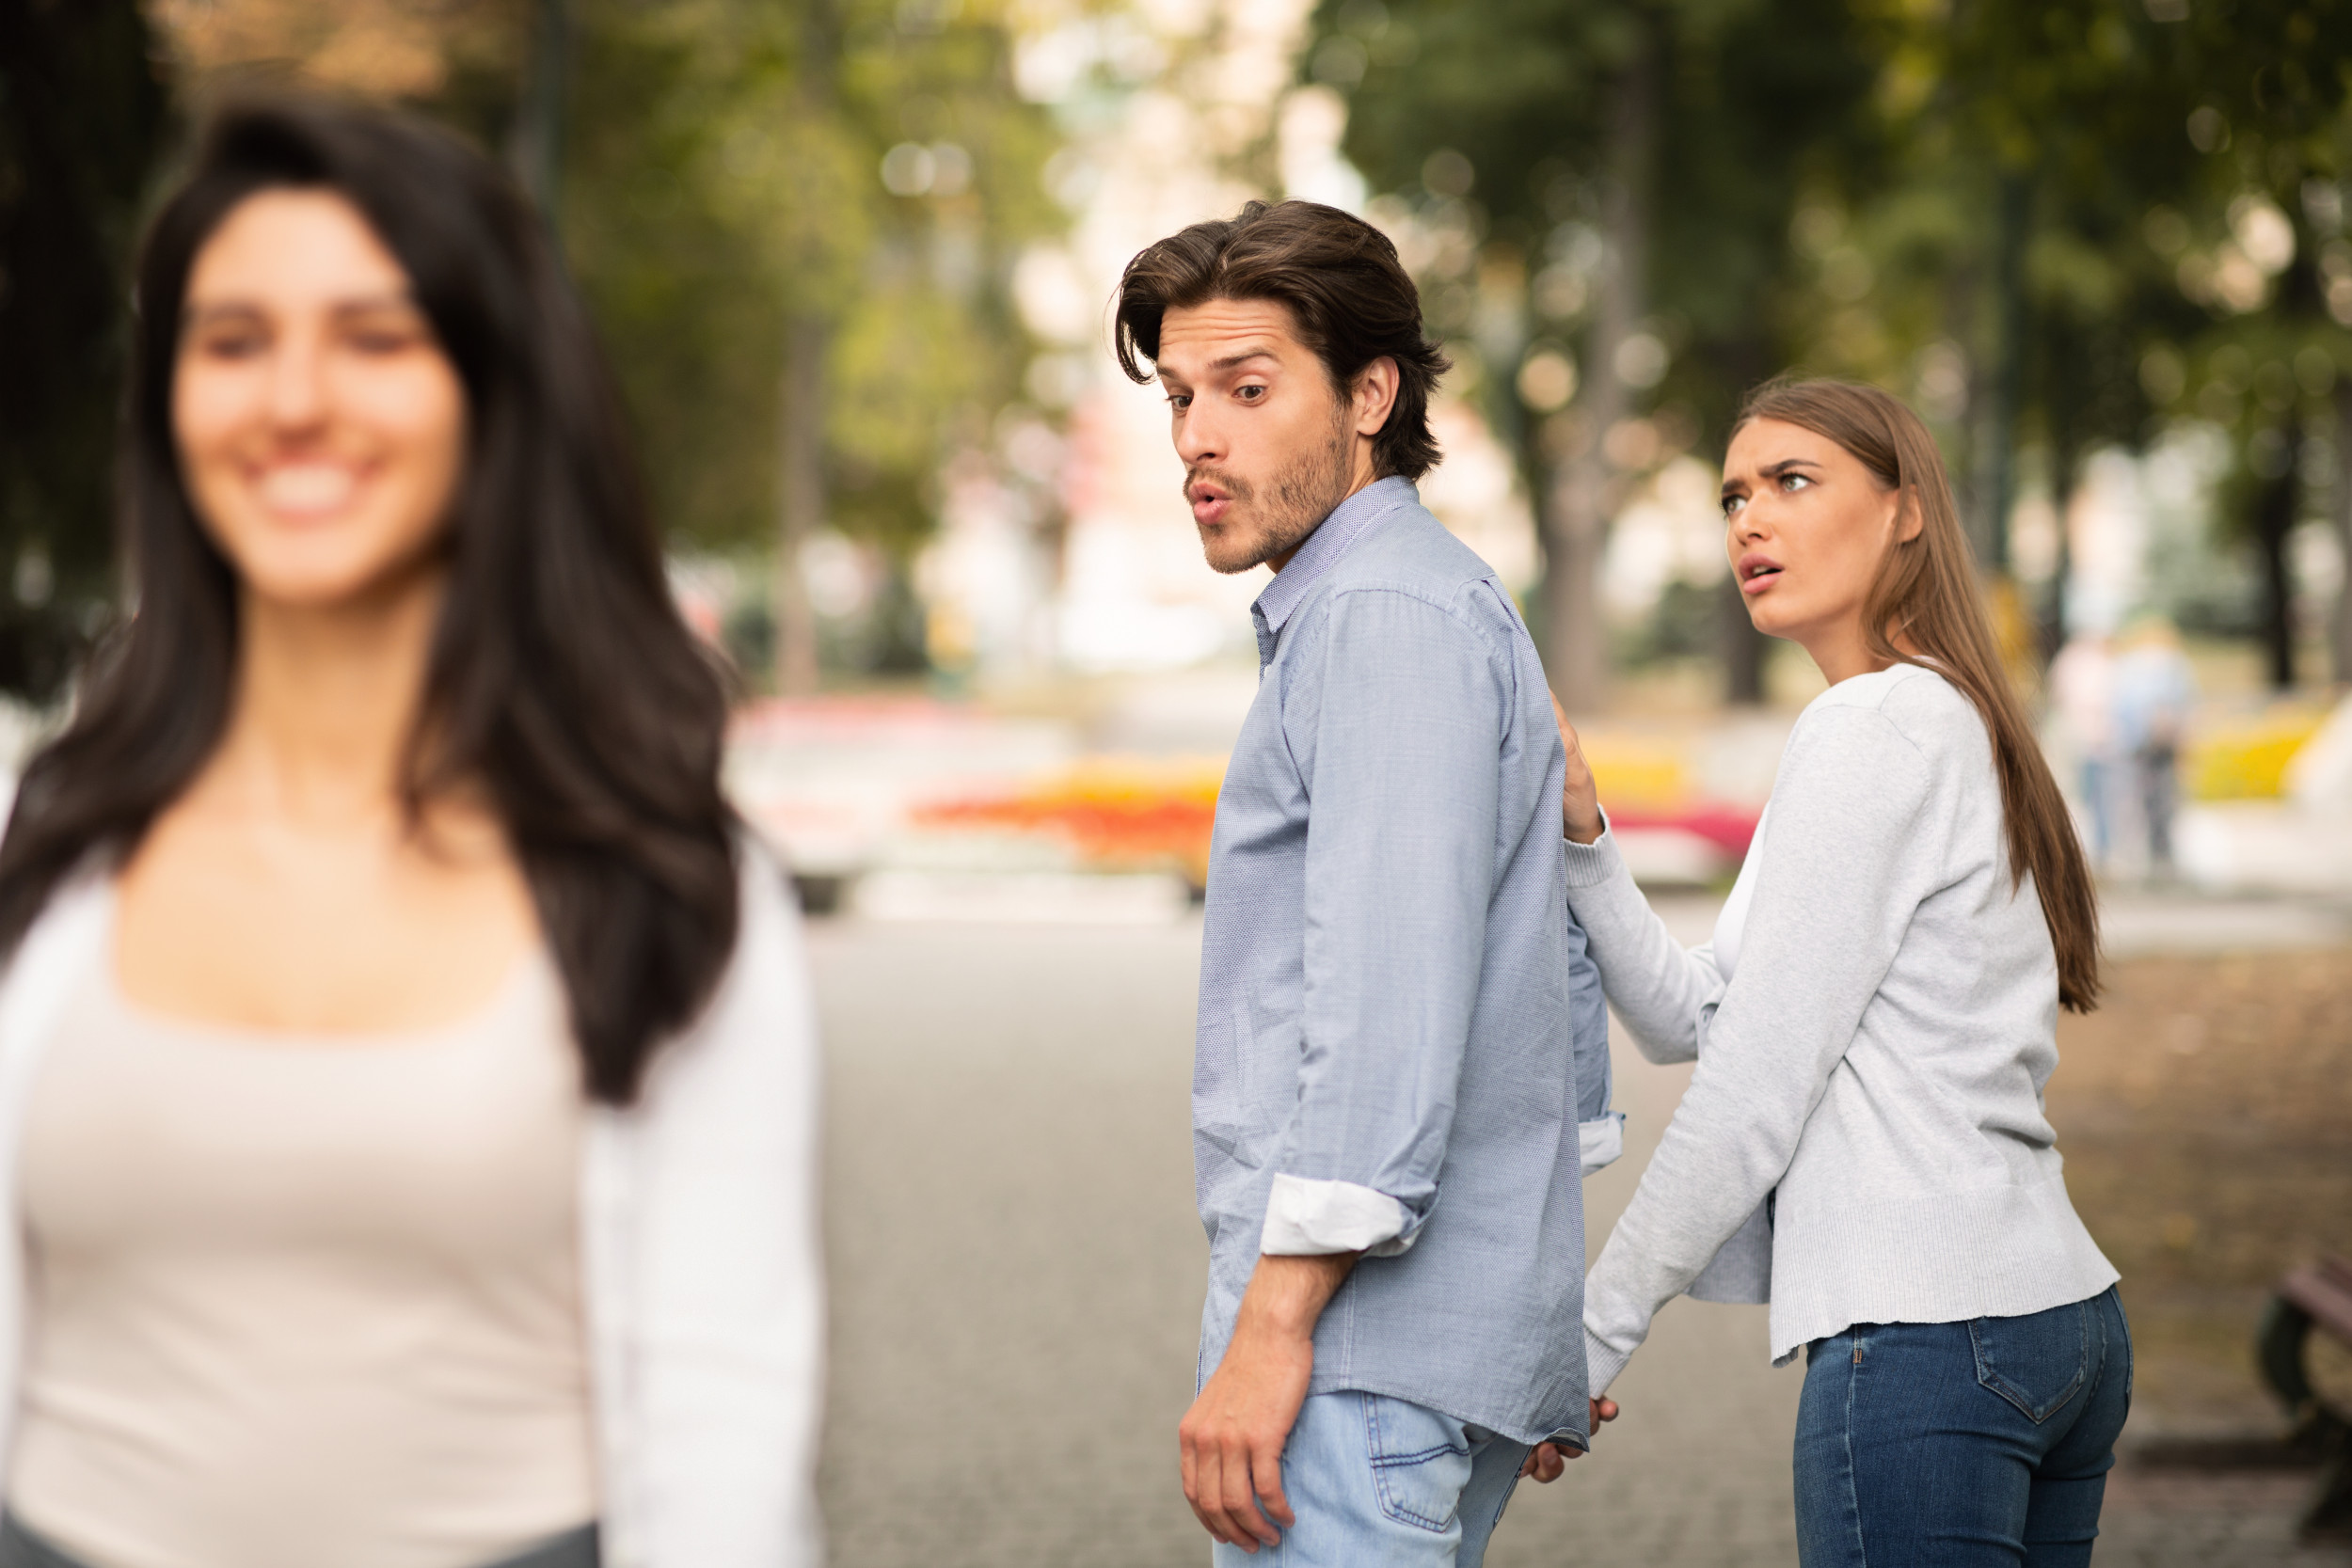 Boyfriend distracted by other woman